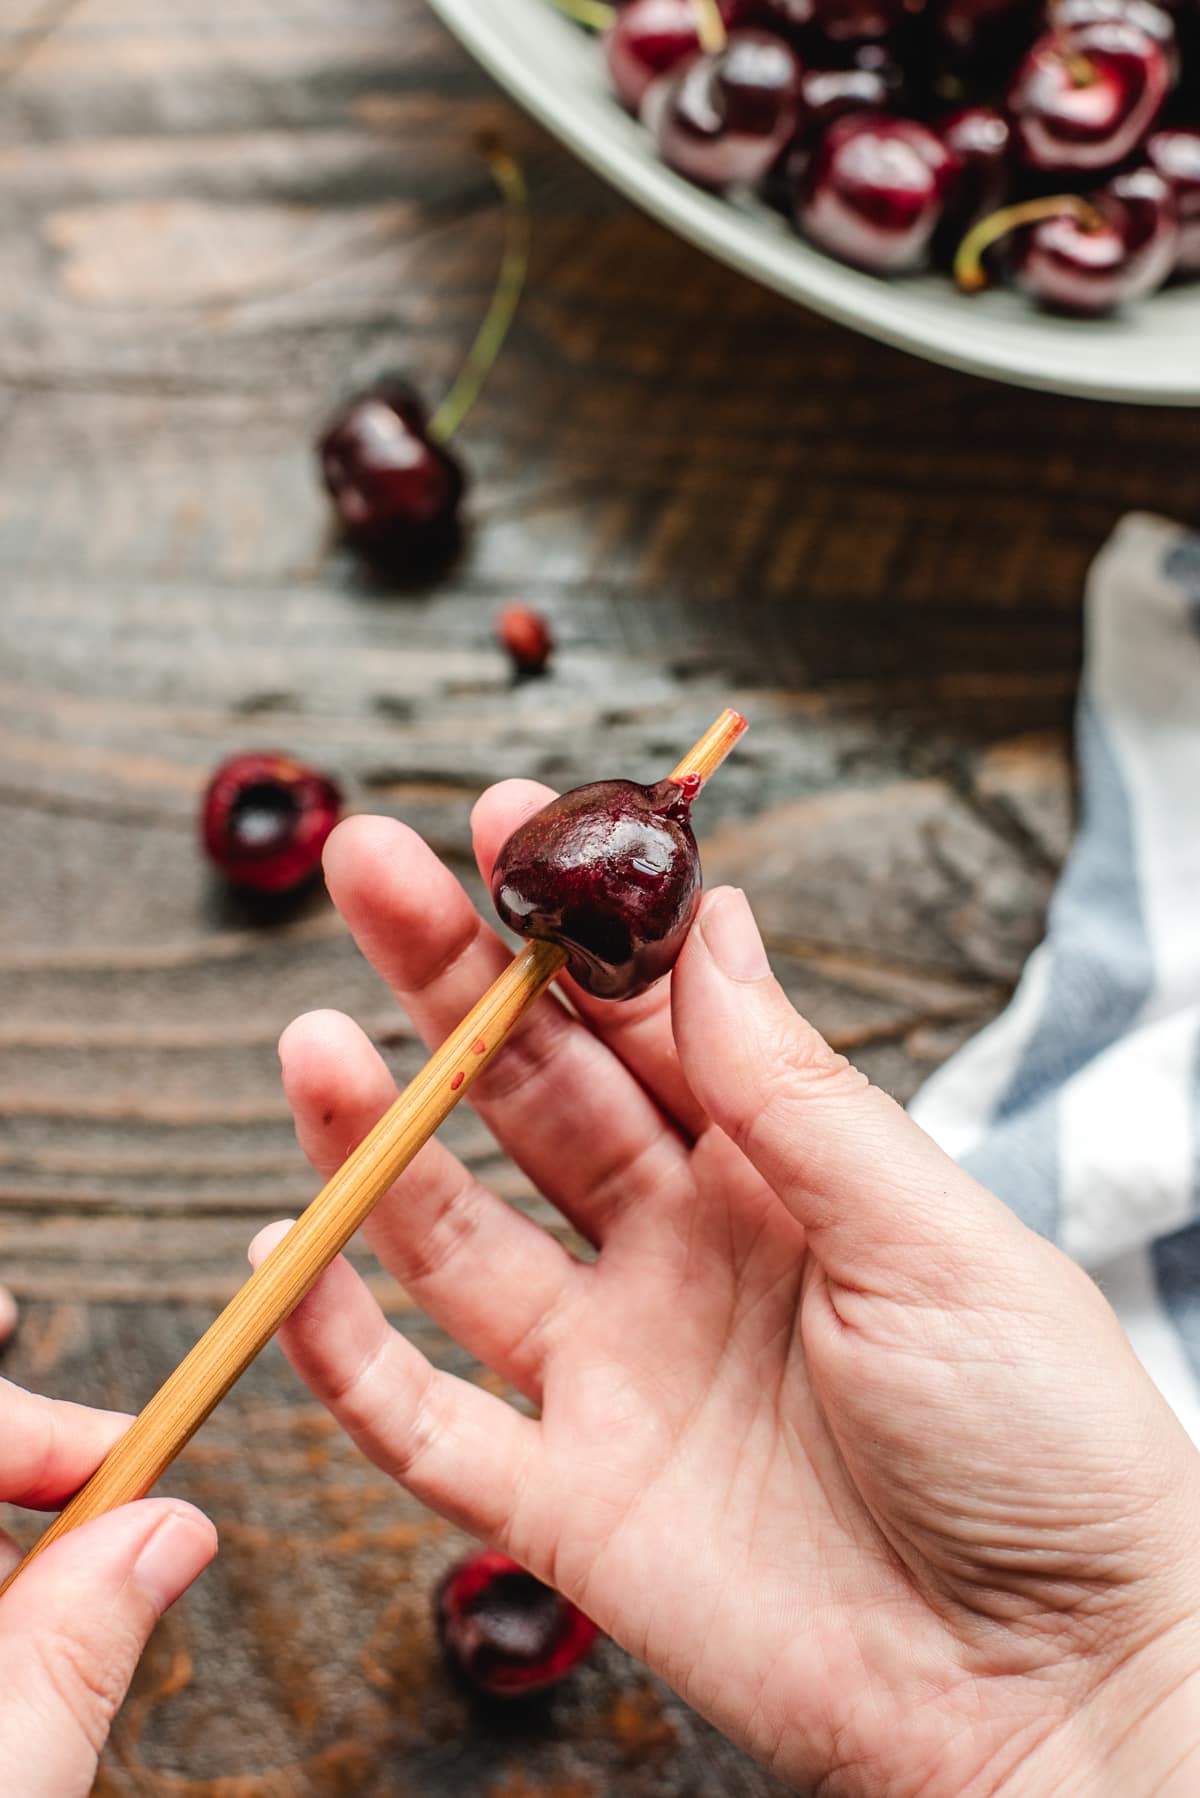 A wooden chopstick pushed through the center of the cherry to remove the pit